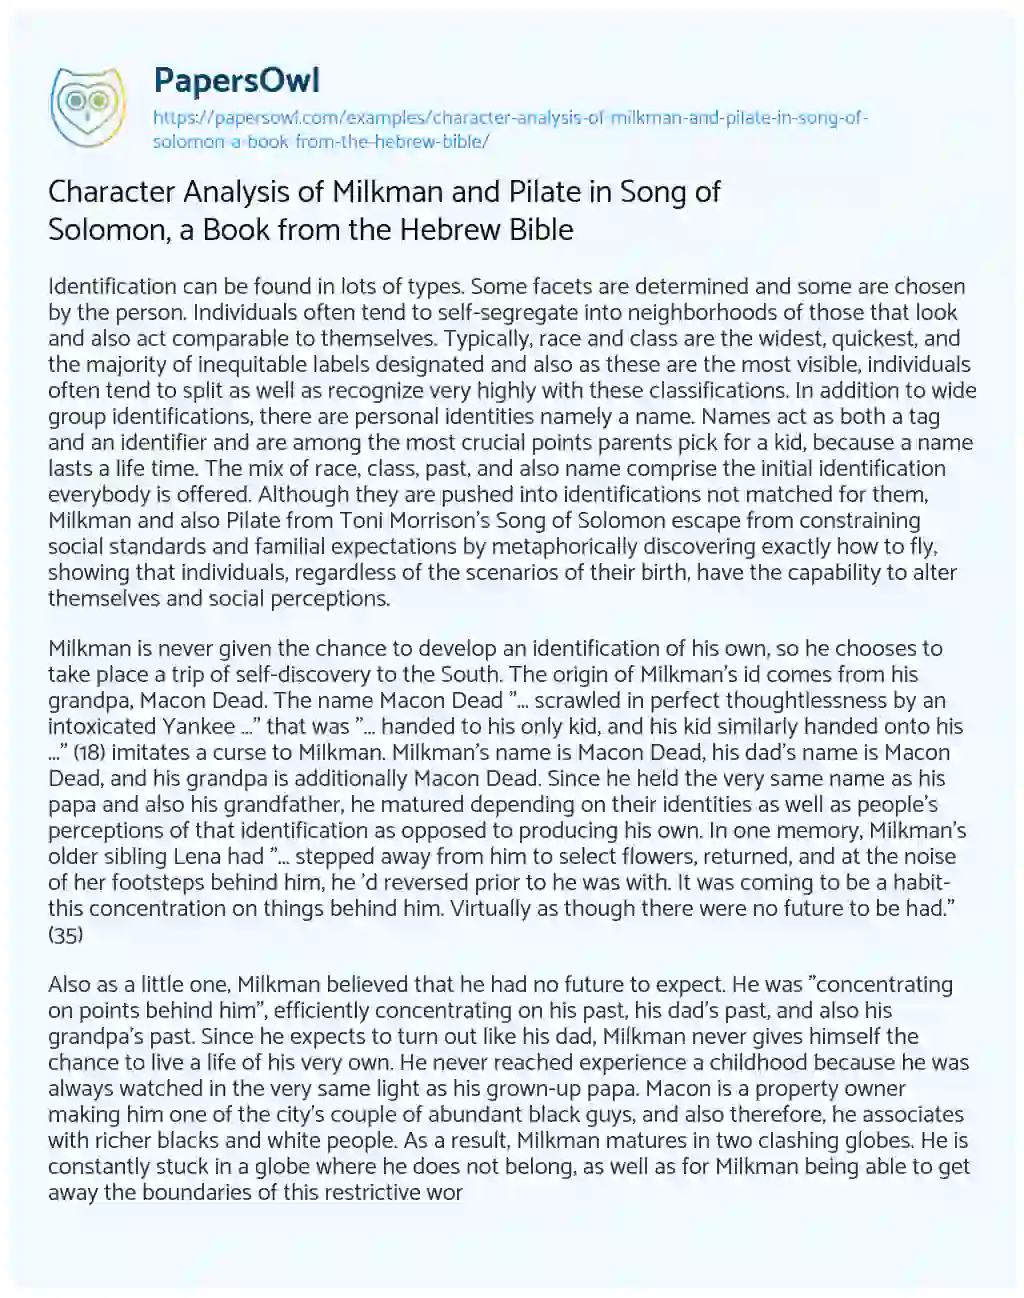 Essay on Character Analysis of Milkman and Pilate in Song of Solomon, a Book from the Hebrew Bible